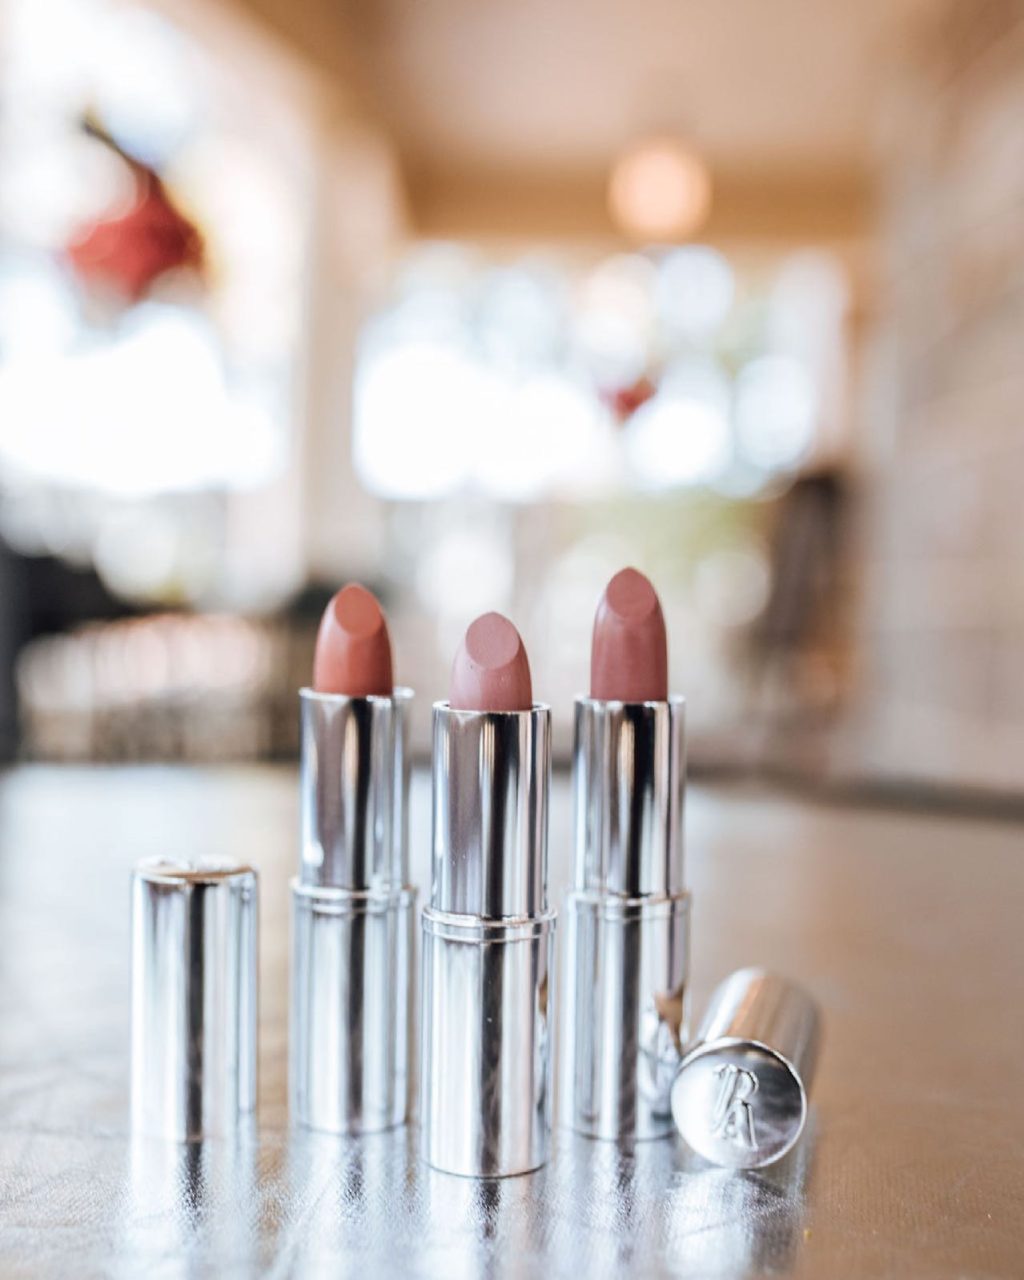 Our Favourite Vegan Lipsticks & Makeup Advice From Industry Pros